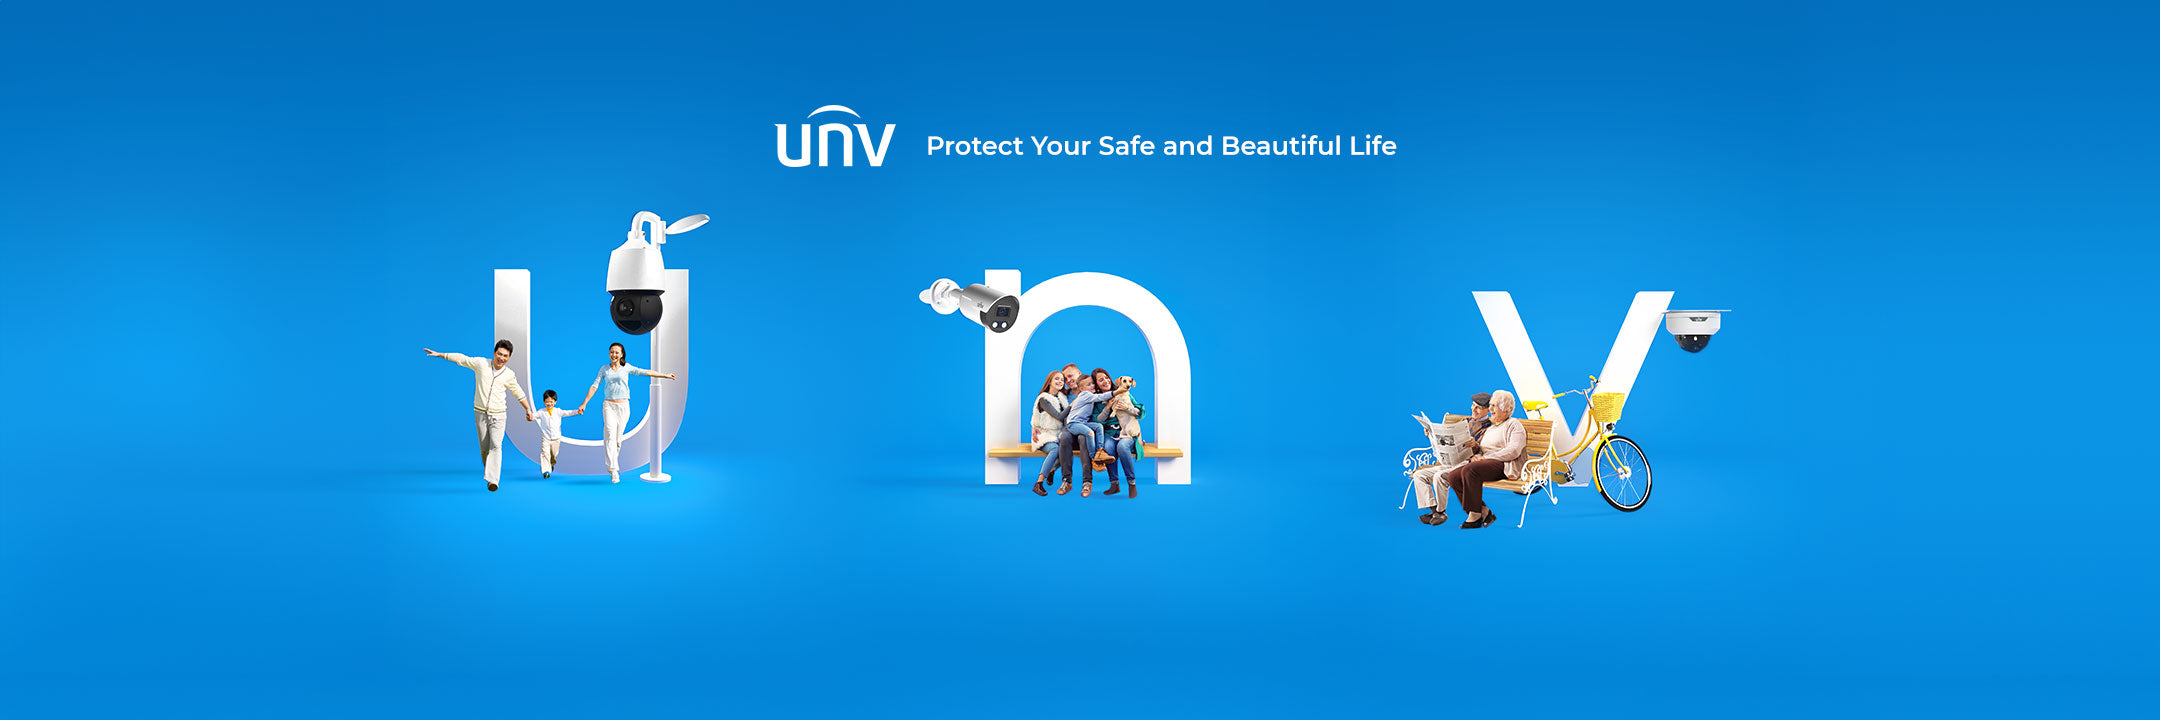 Keeping a Watchful Eye with UNV Security Cameras: UniView's Prime II Series | All Security Equipment